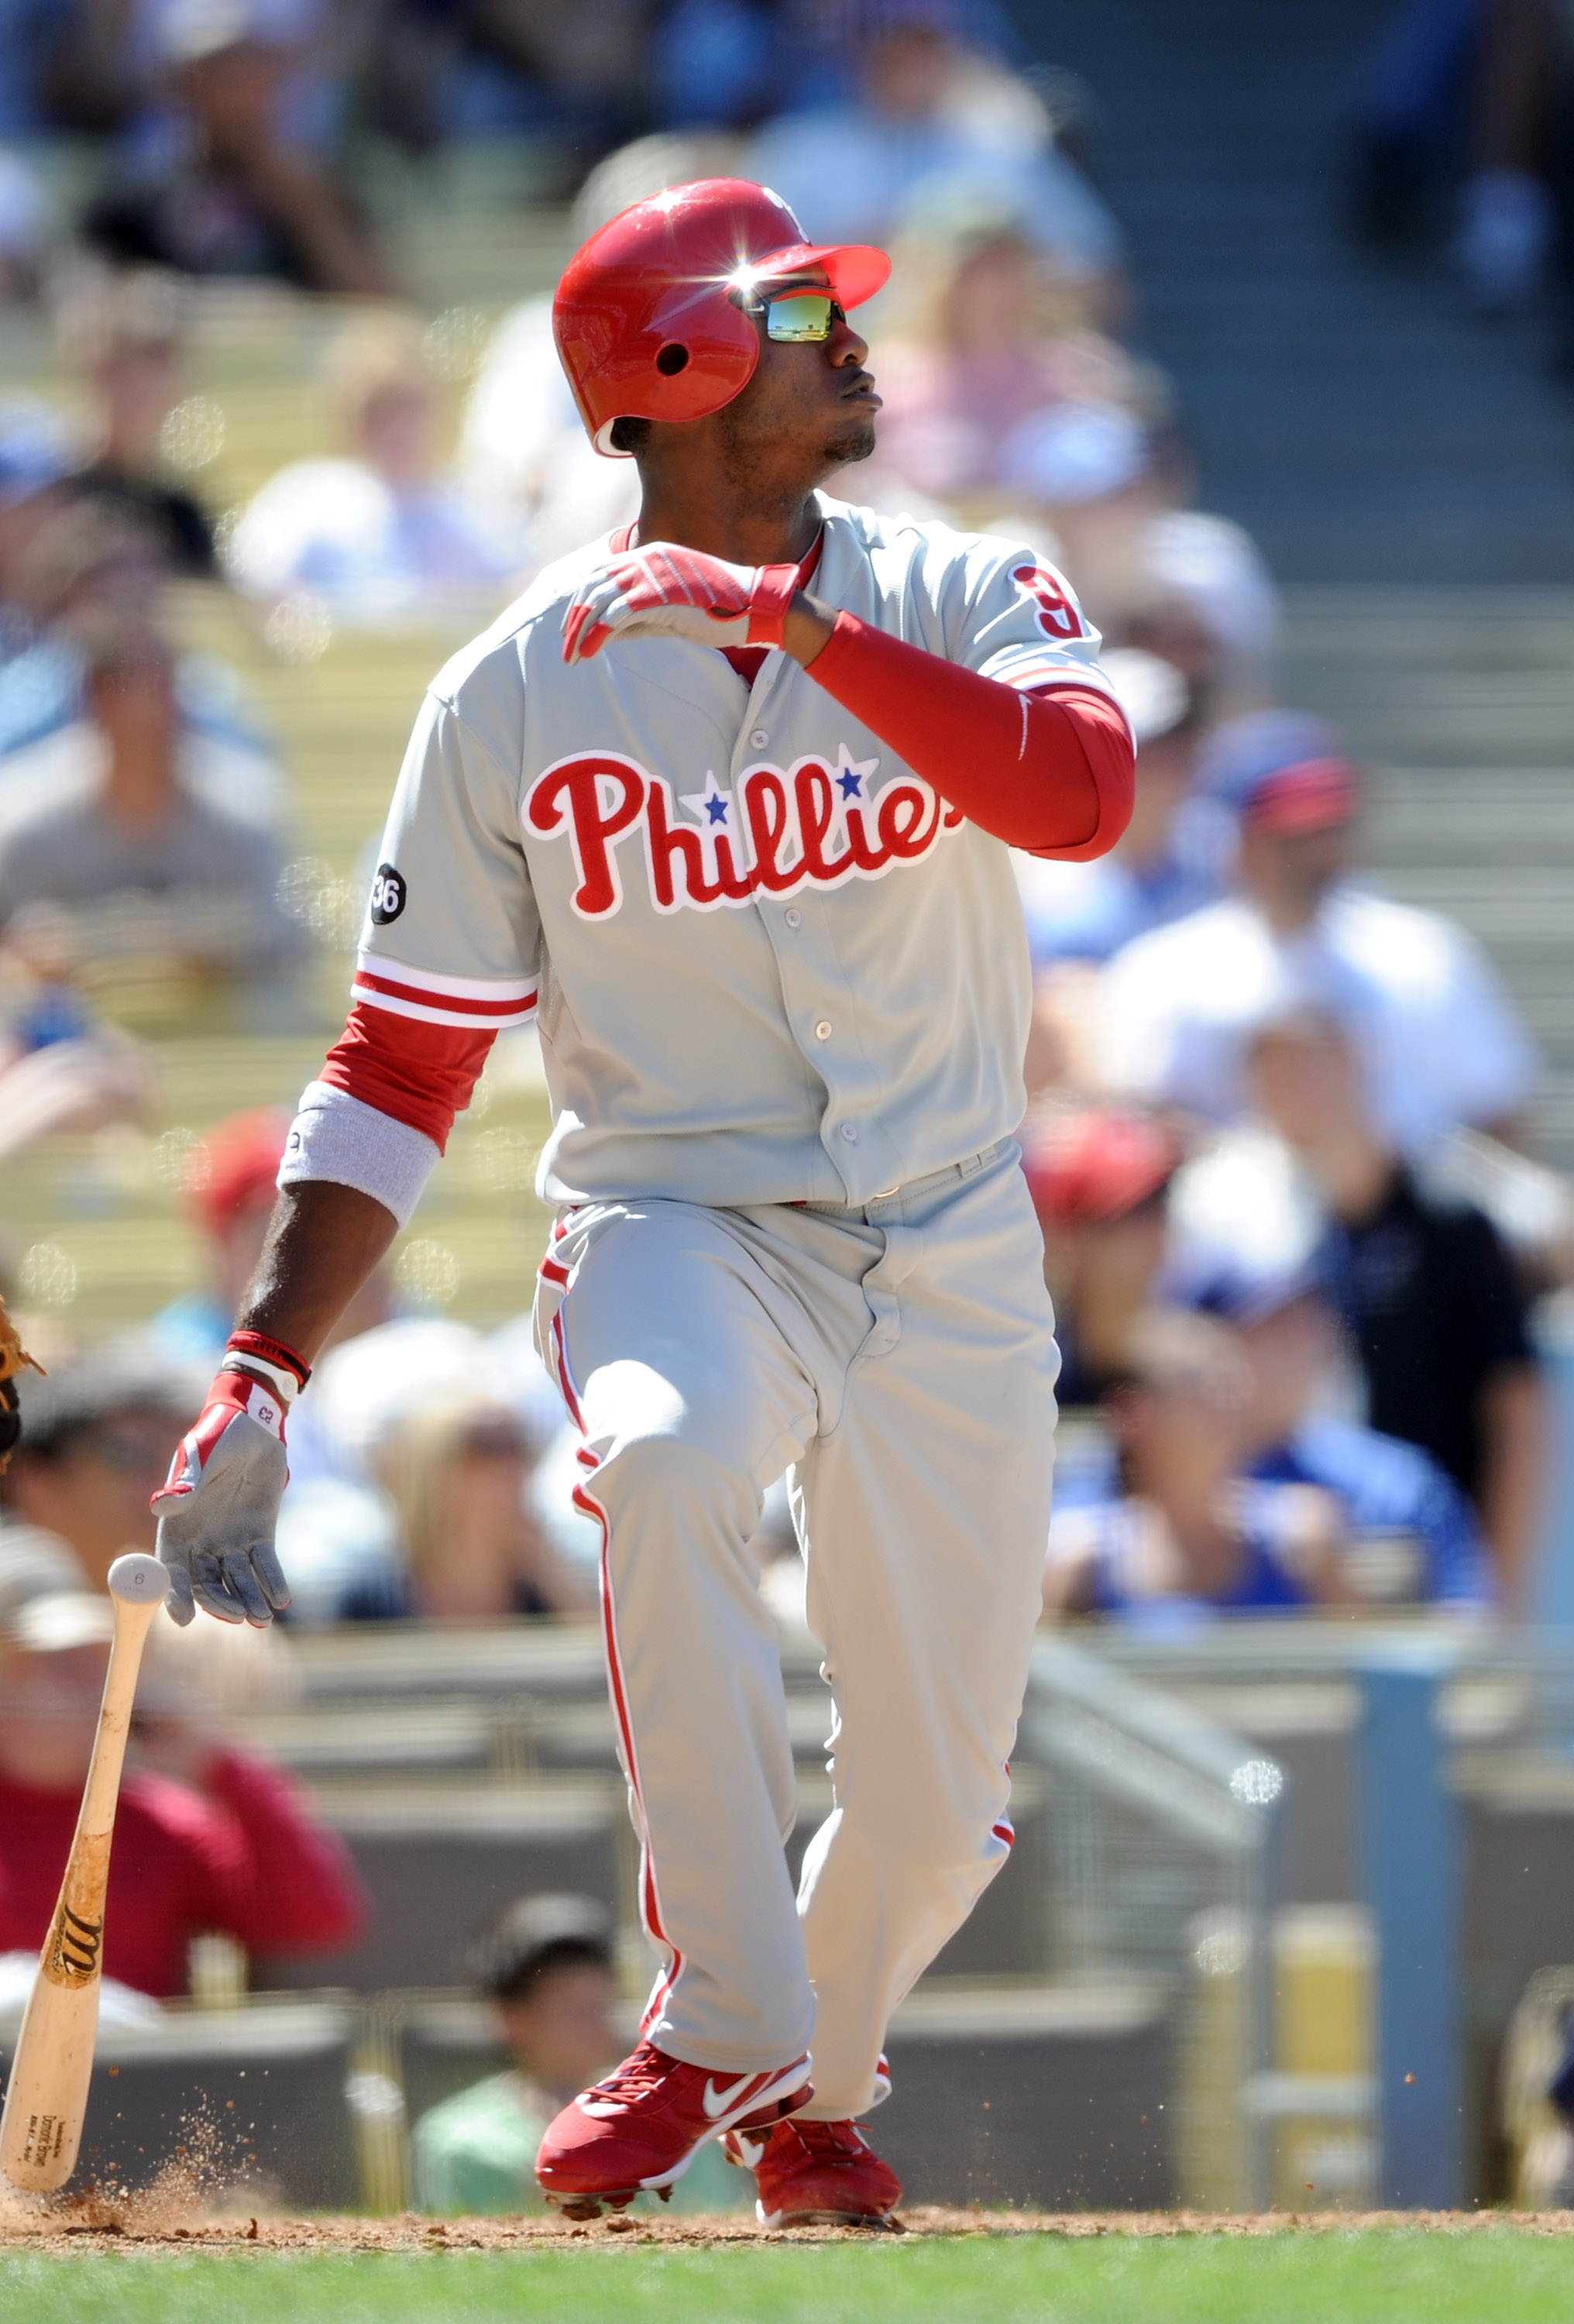 LOS ANGELES, CA - SEPTEMBER 01:  Dominic Brown #9 of the Philadelphia Phillies hits a double against the Los Angeles Dodgers at Dodger Stadium on September 1, 2010 in Los Angeles, California.  (Photo by Harry How/Getty Images)